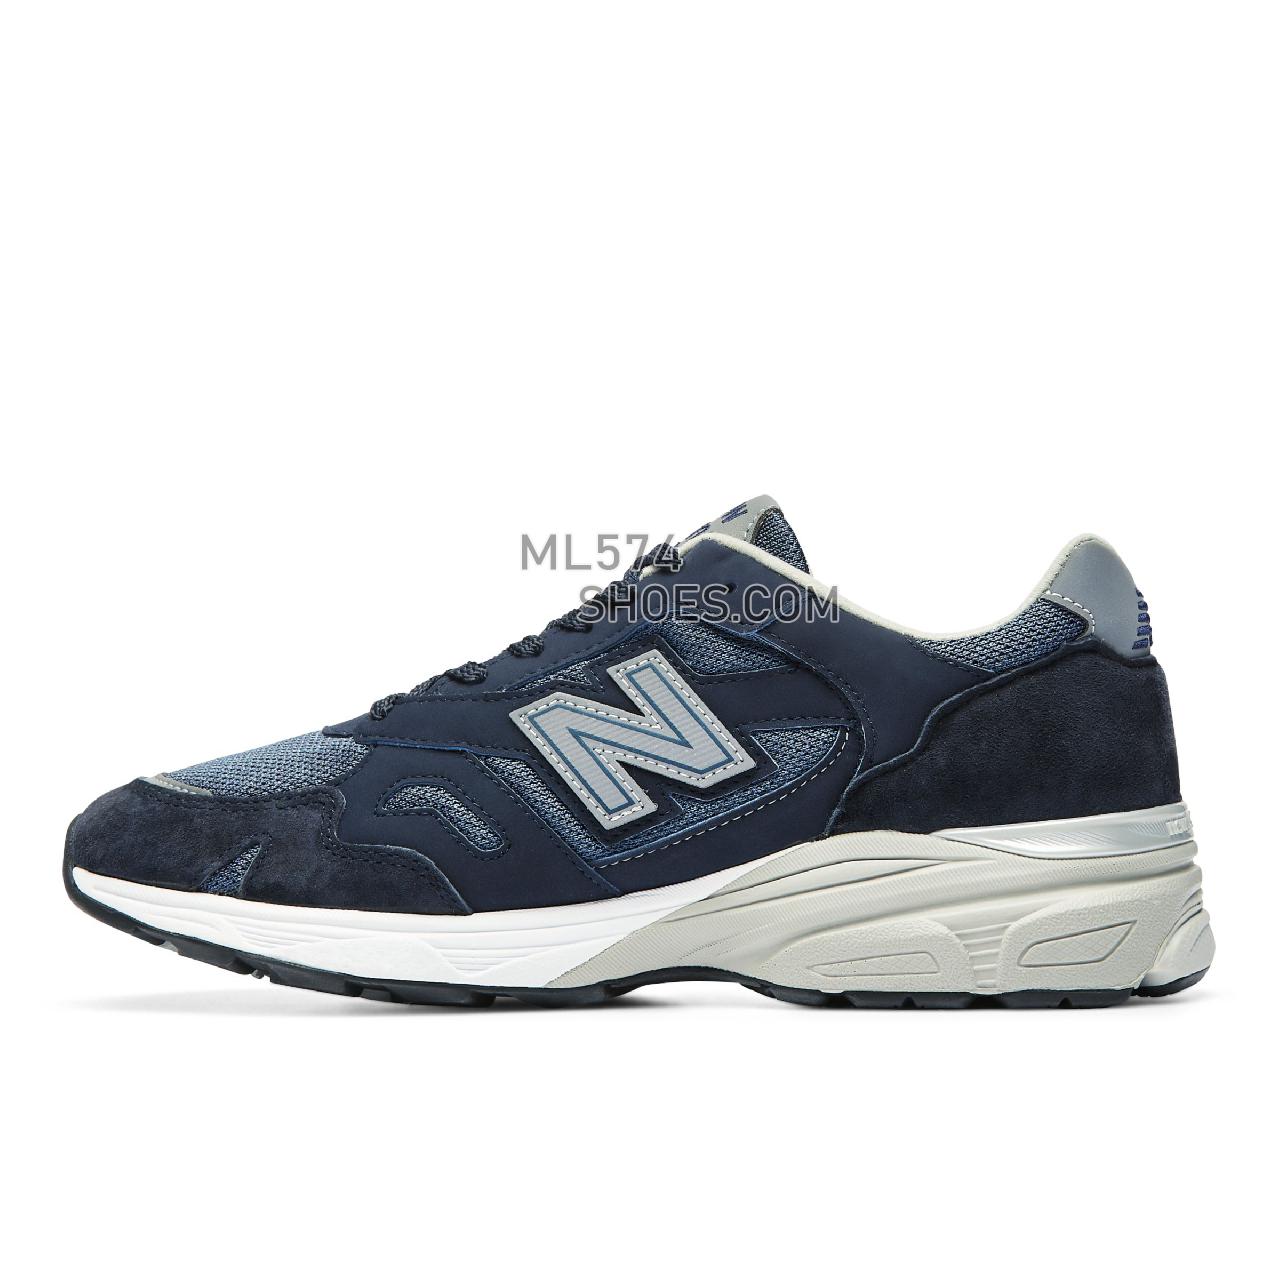 New Balance Made in UK 920 - Men's Made in USA And UK Sneakers - Navy with Grey and White - M920CNV